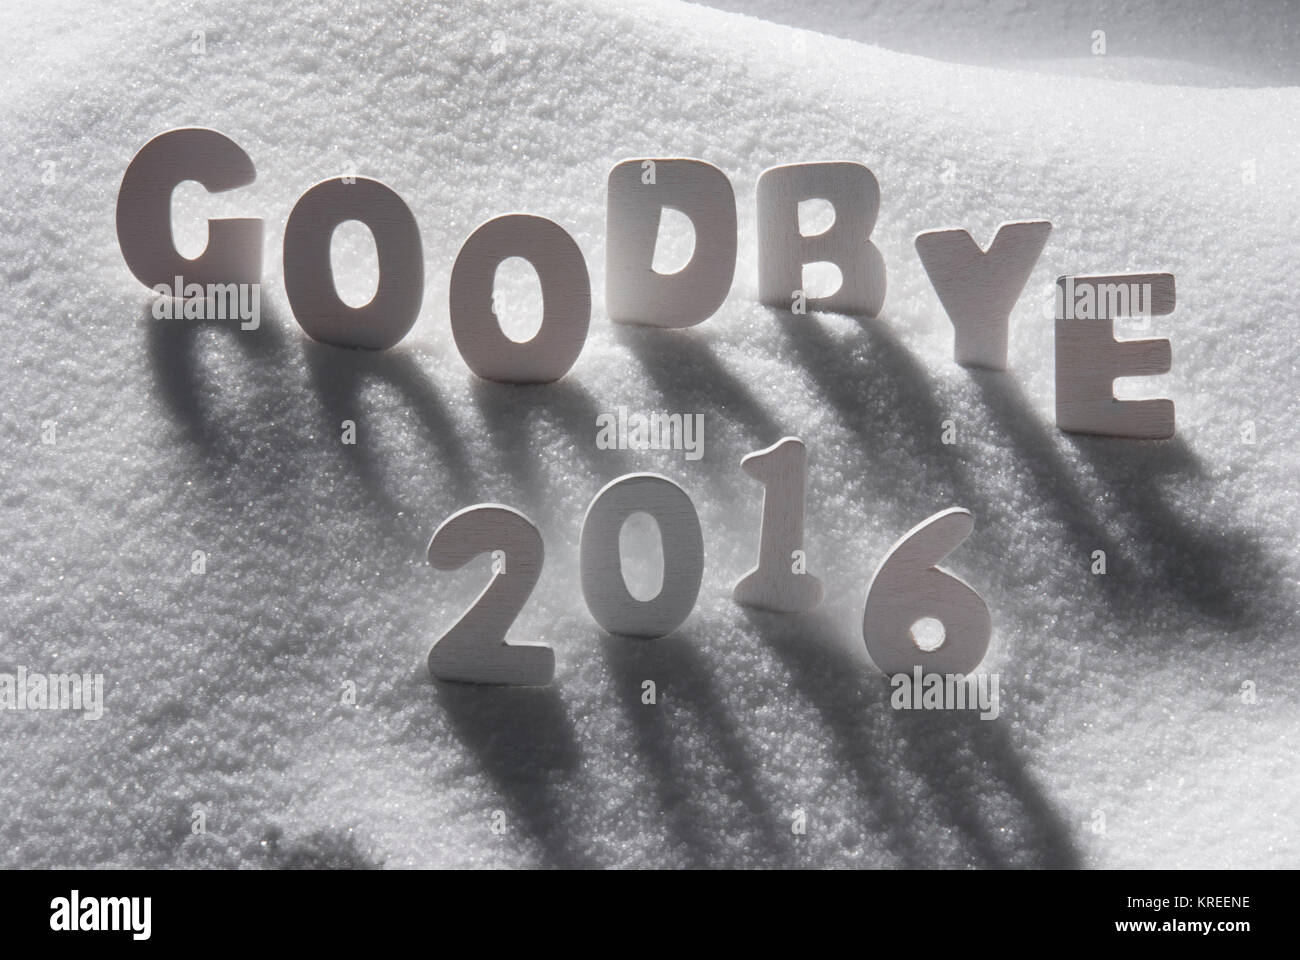 White Letters Building English Text Goodbye 2016 In Snow. Snowy Scenery For Happy New Year Greetings. Stock Photo